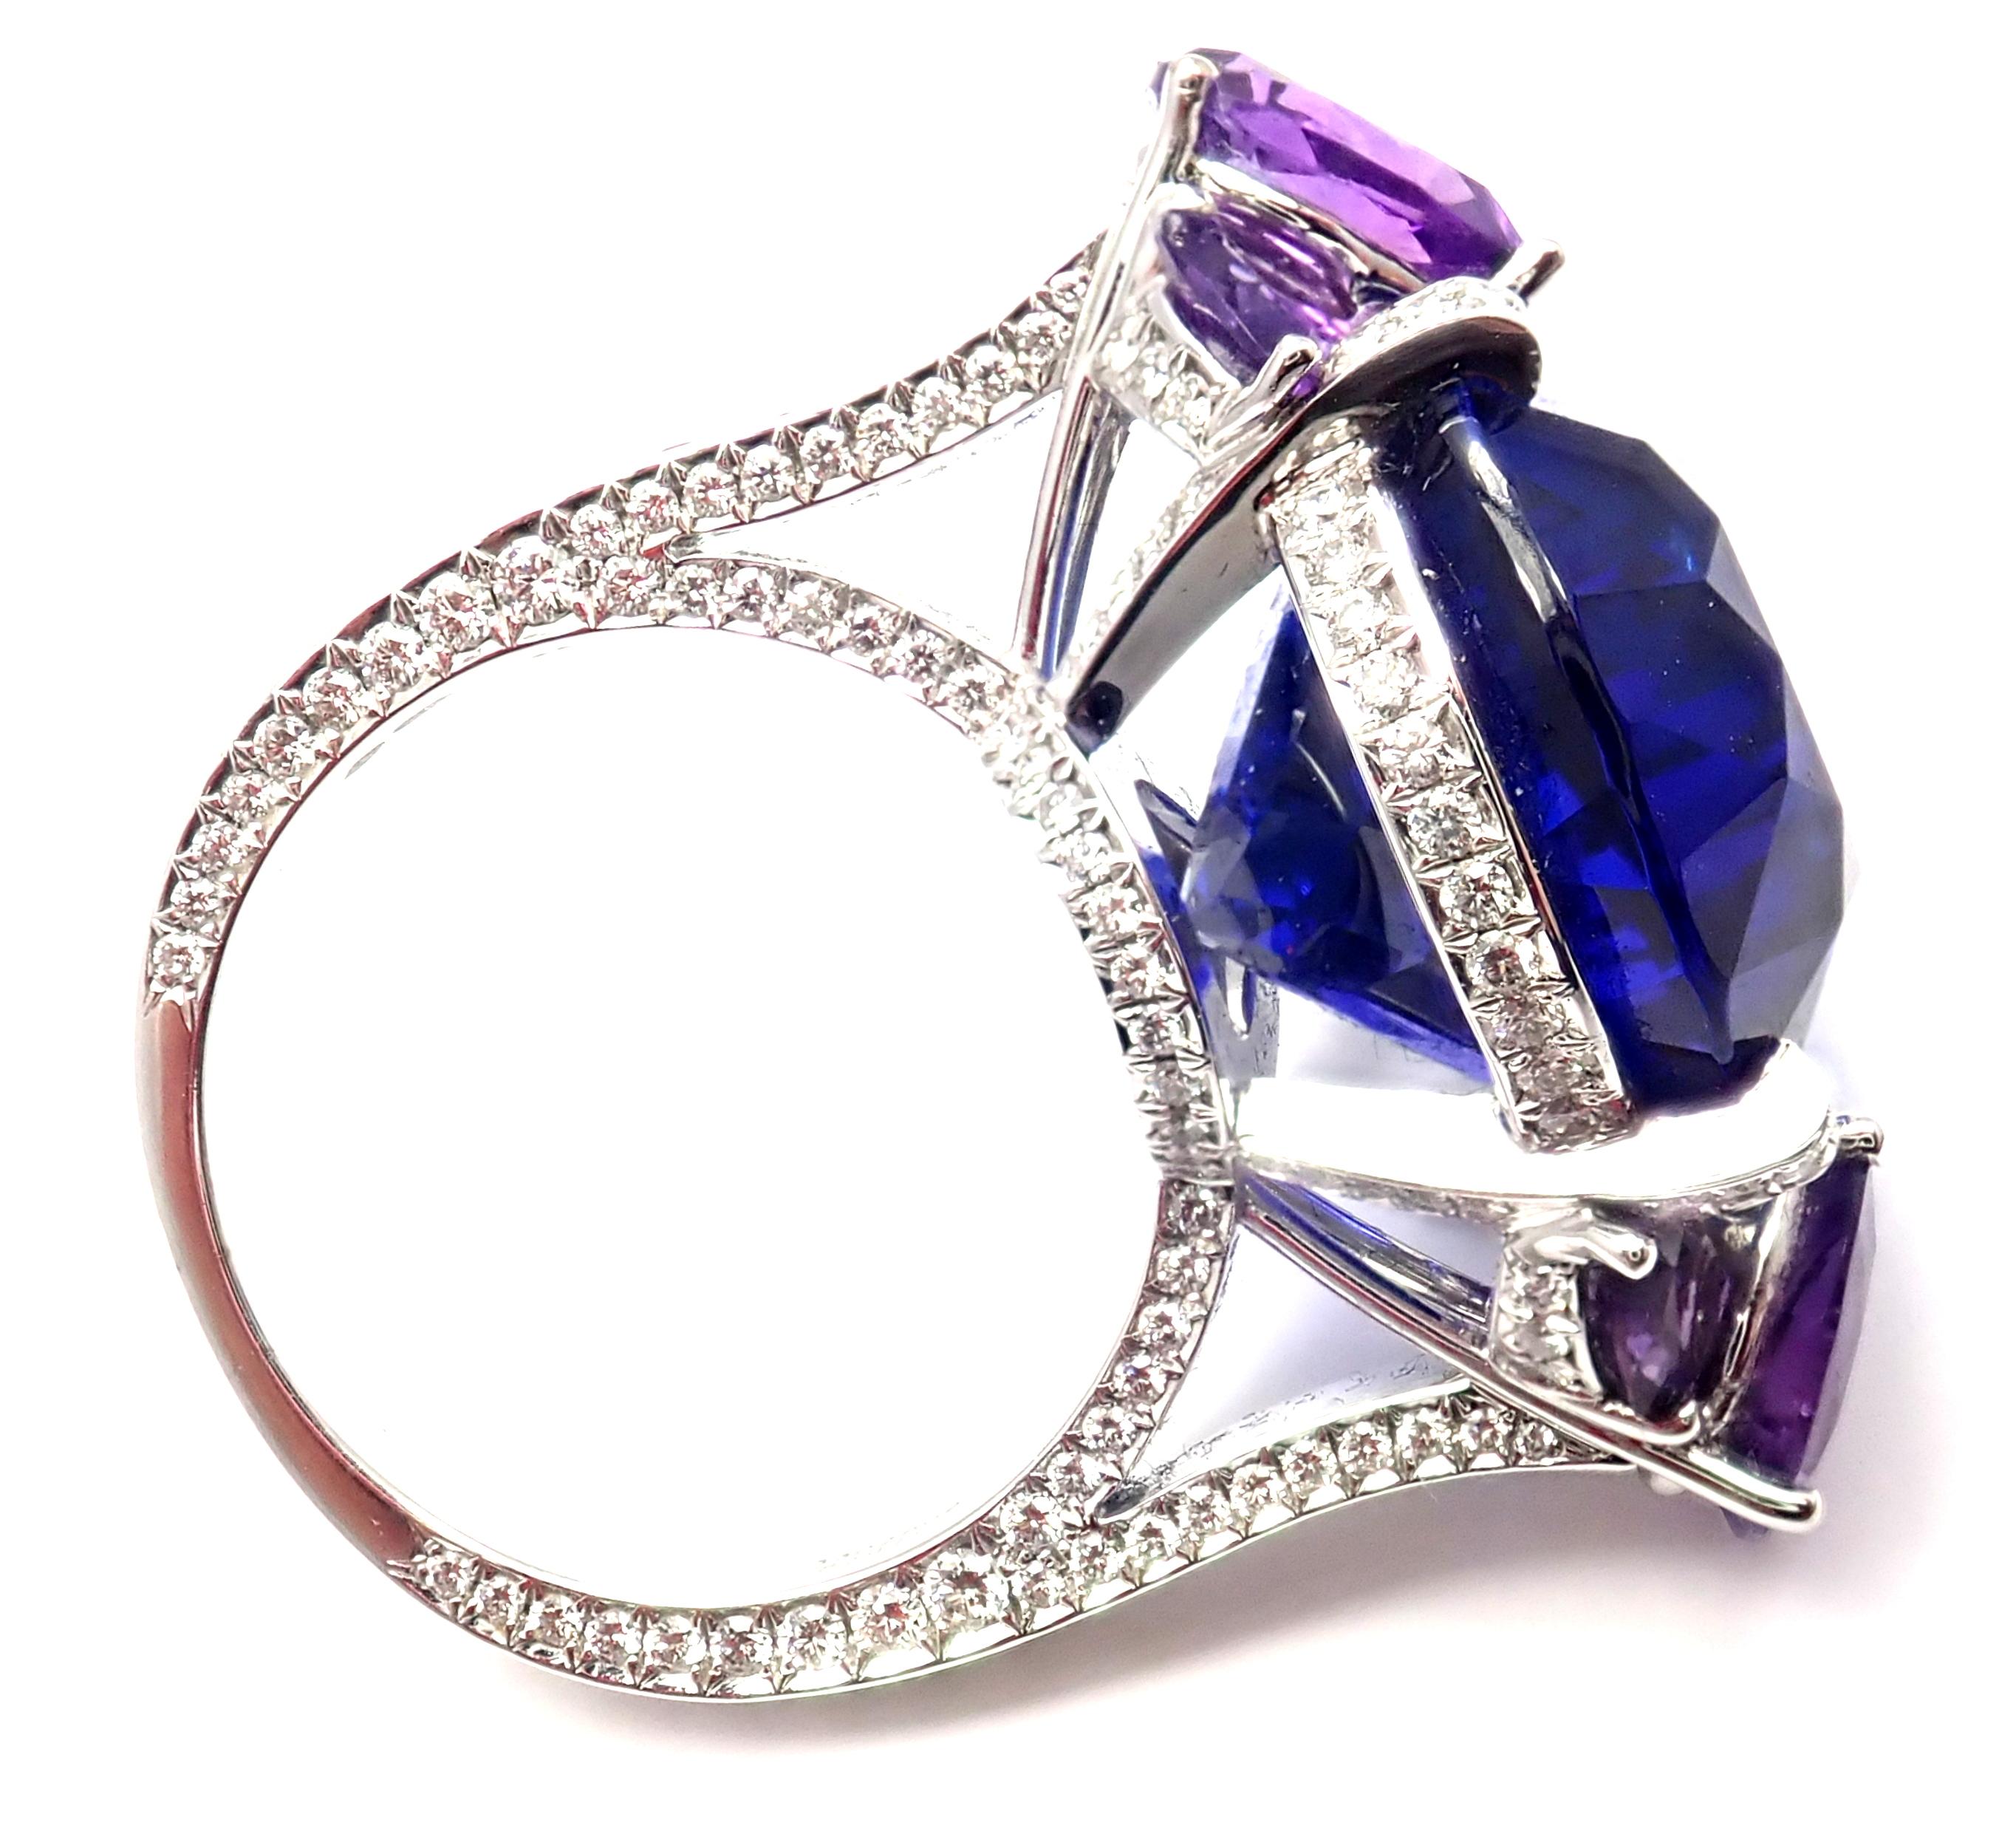 Chopard High Jewelry Diamond Large Tanzanite Amethyst White Gold Ring In New Condition For Sale In Holland, PA